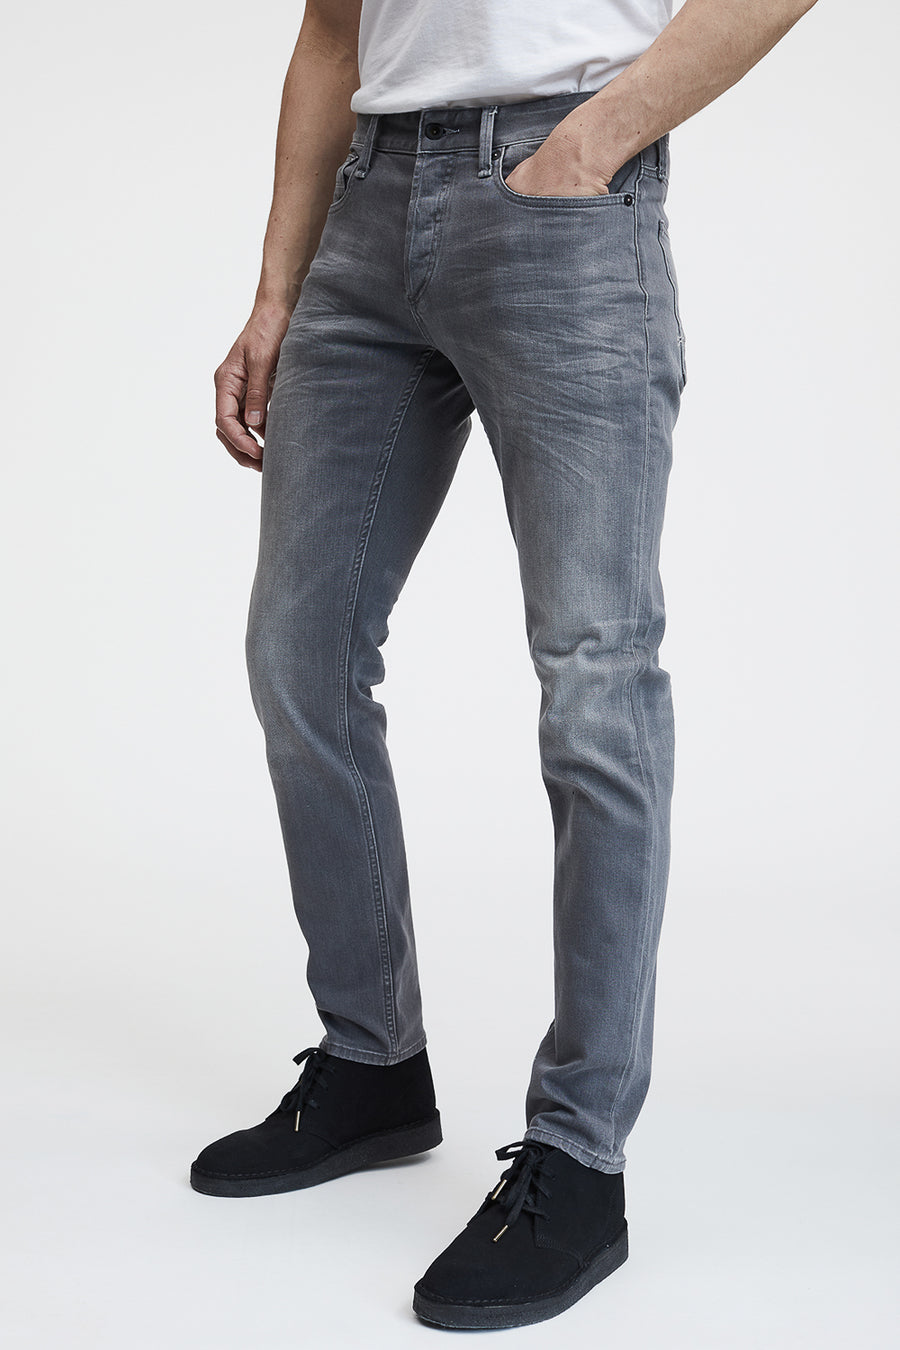 Buy the Denham Razor Aceg Jeans in Grey at Intro. Spend £50 for free UK delivery. Official stockists. We ship worldwide.